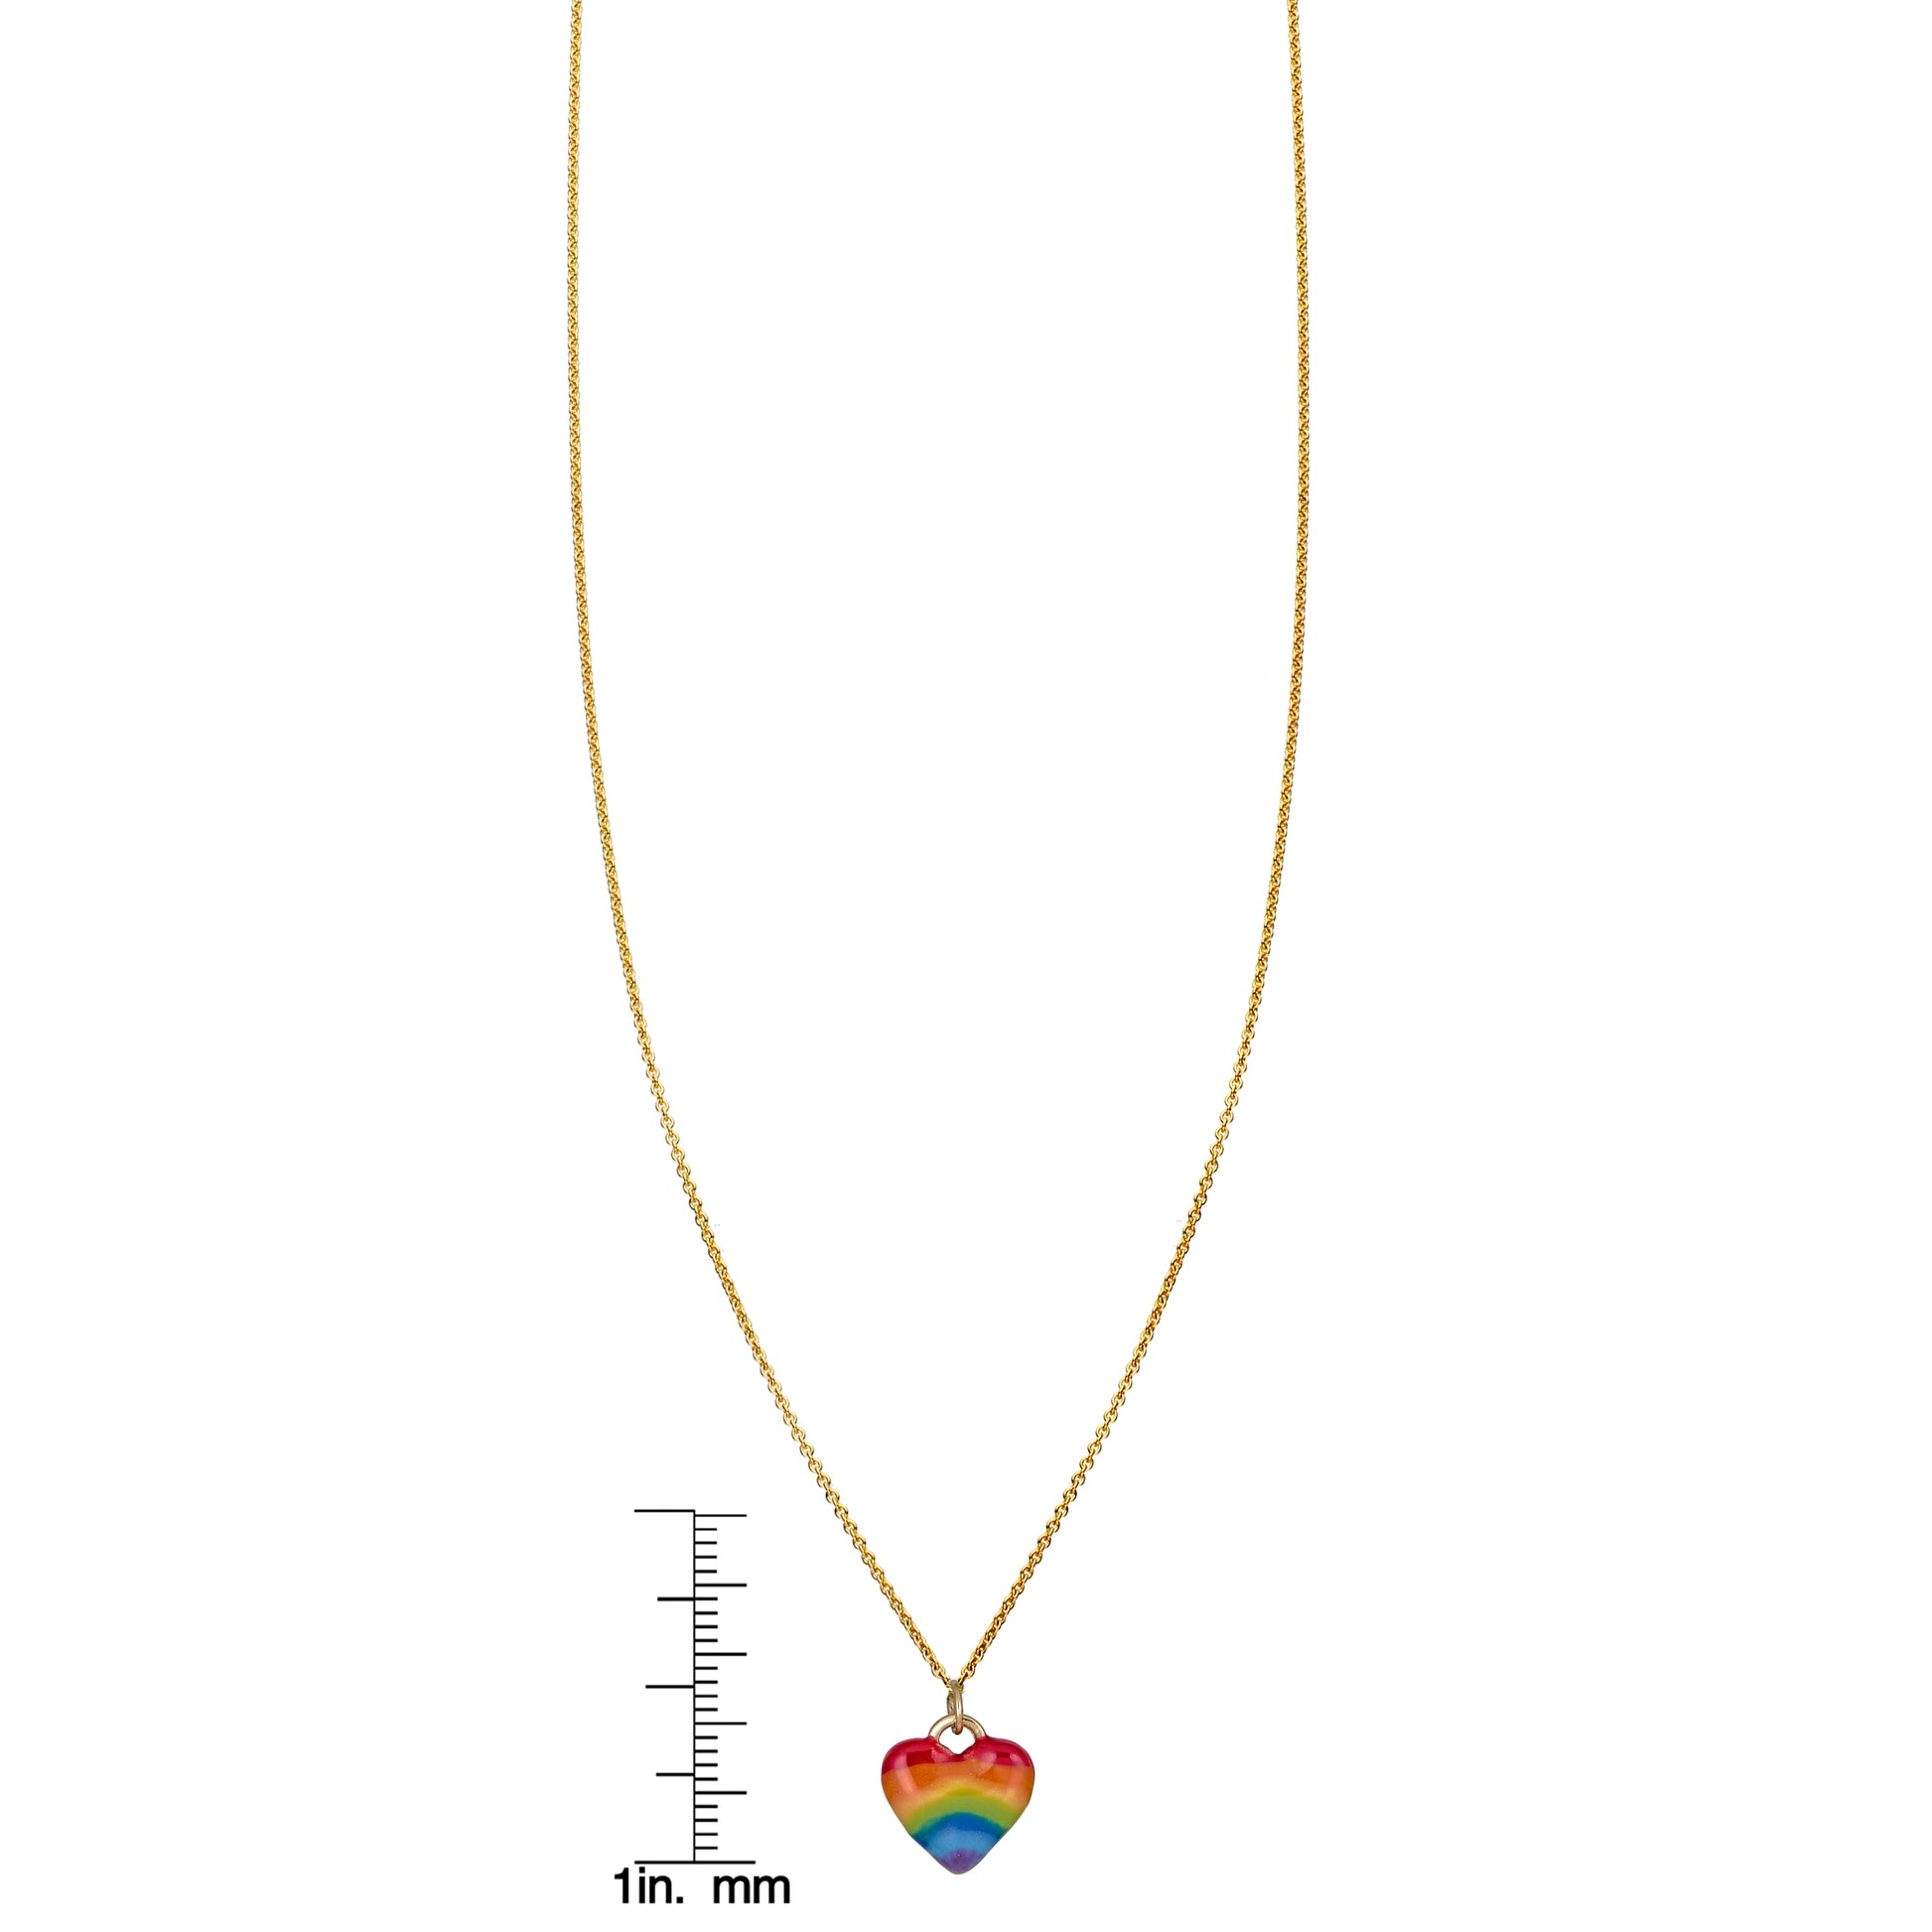 limited edition large enamel gold rainbow heart necklace with ruler